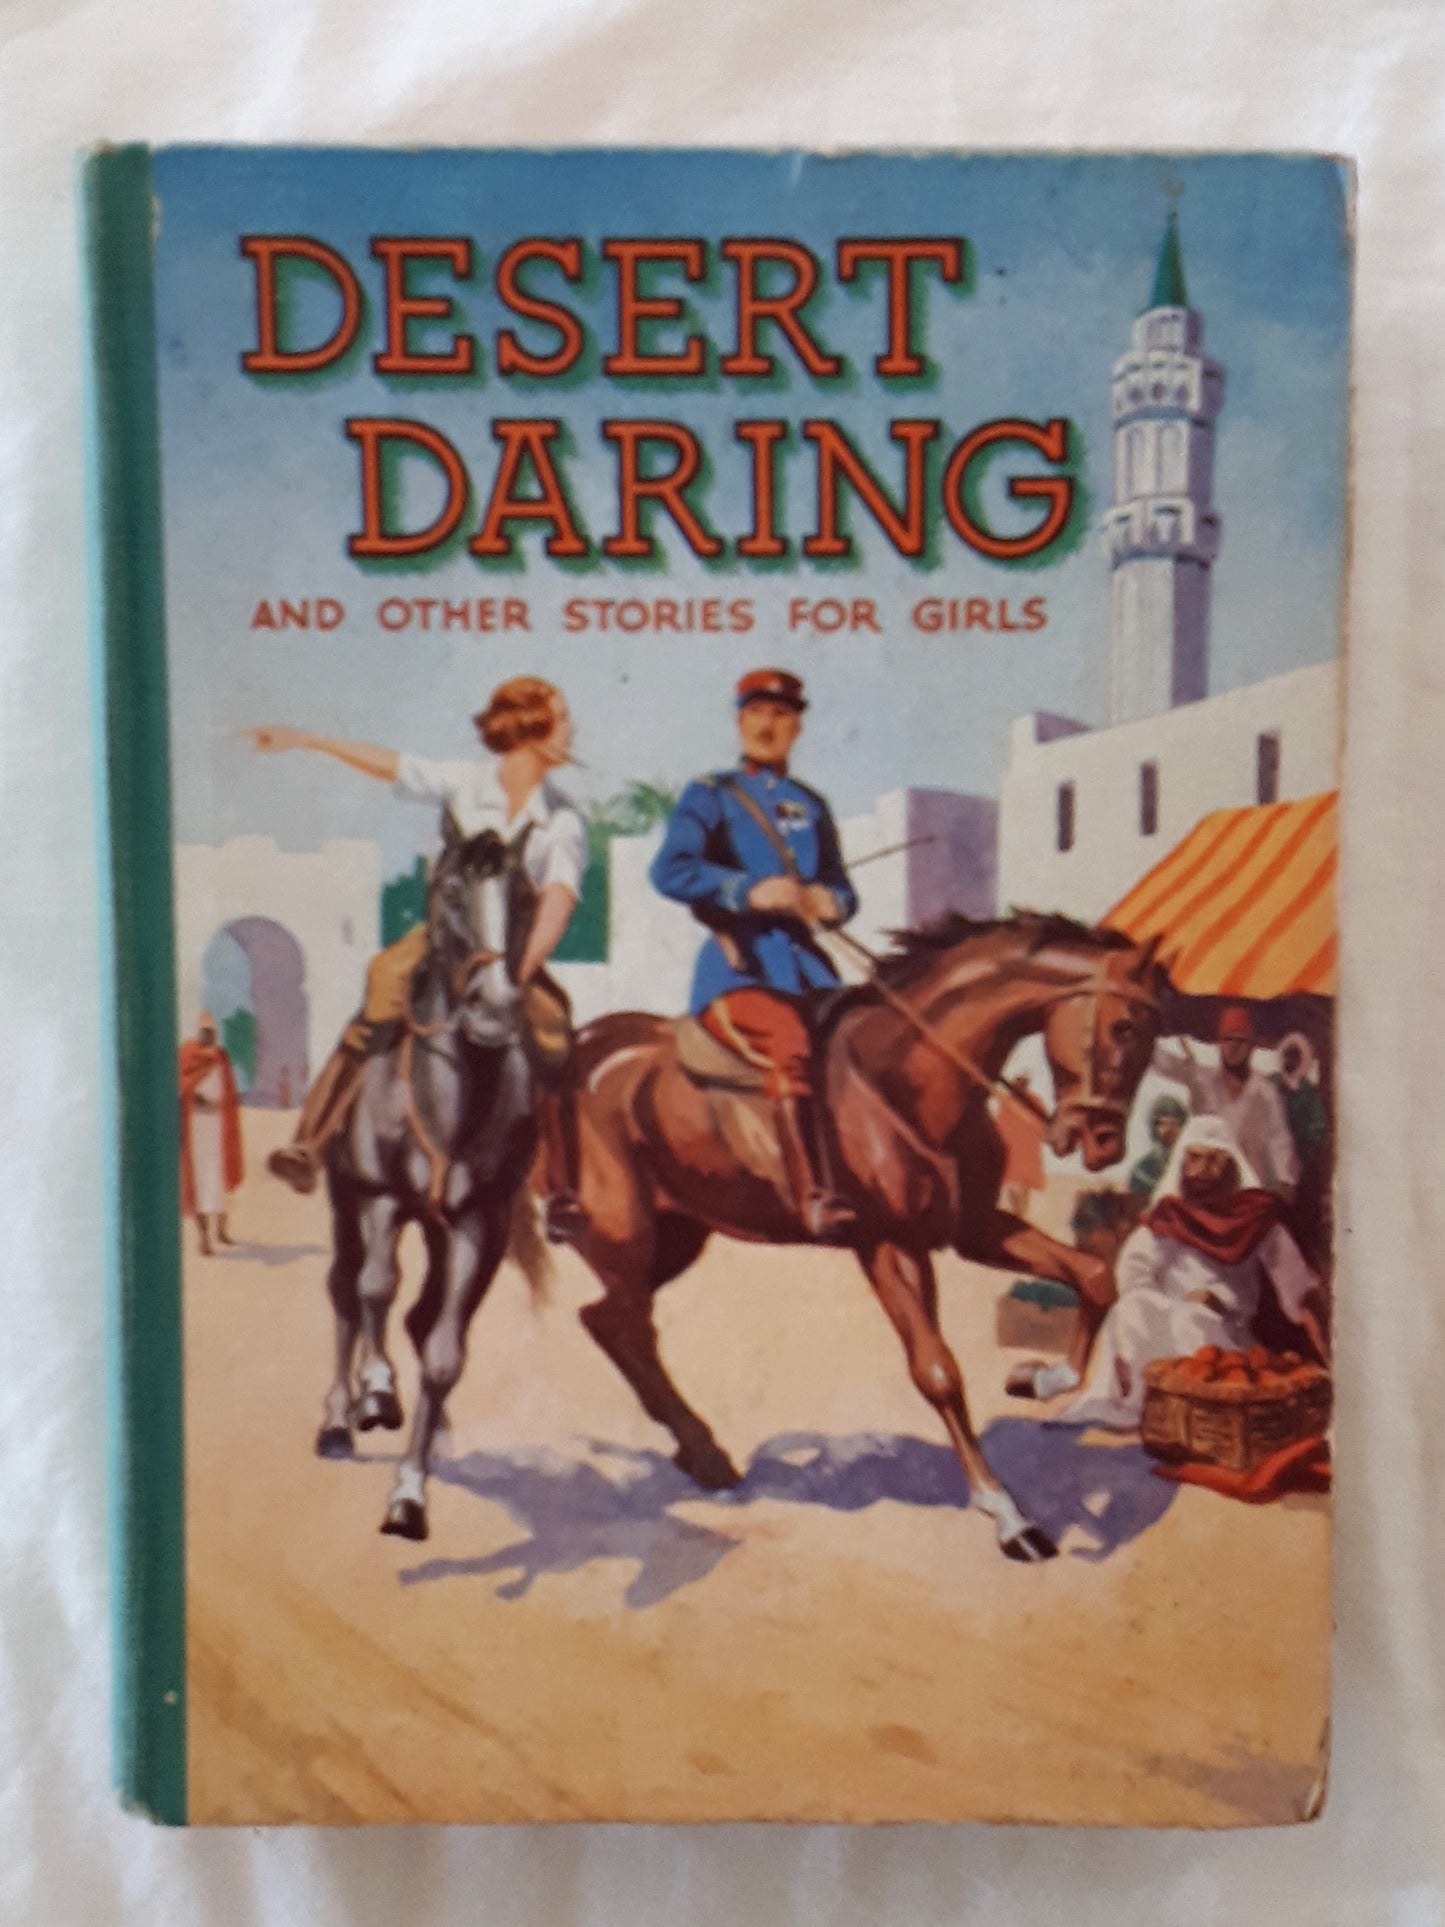 Desert Daring and Other Stories for Girls